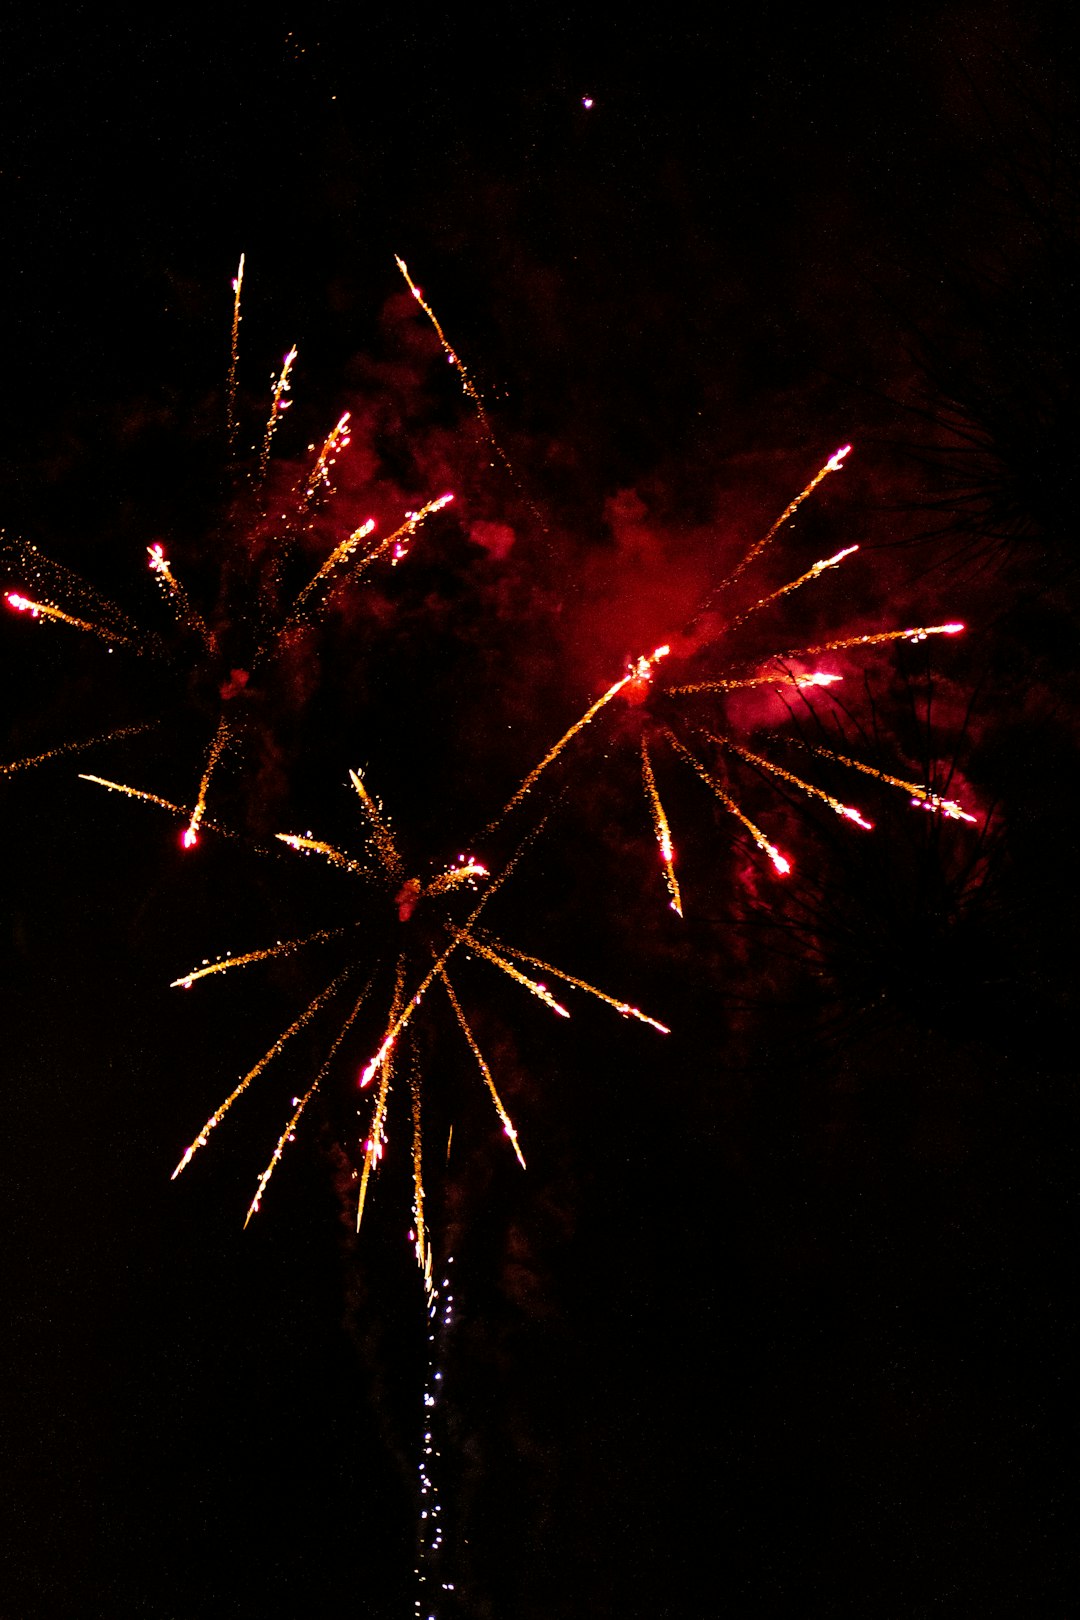 red and yellow fireworks during nighttime